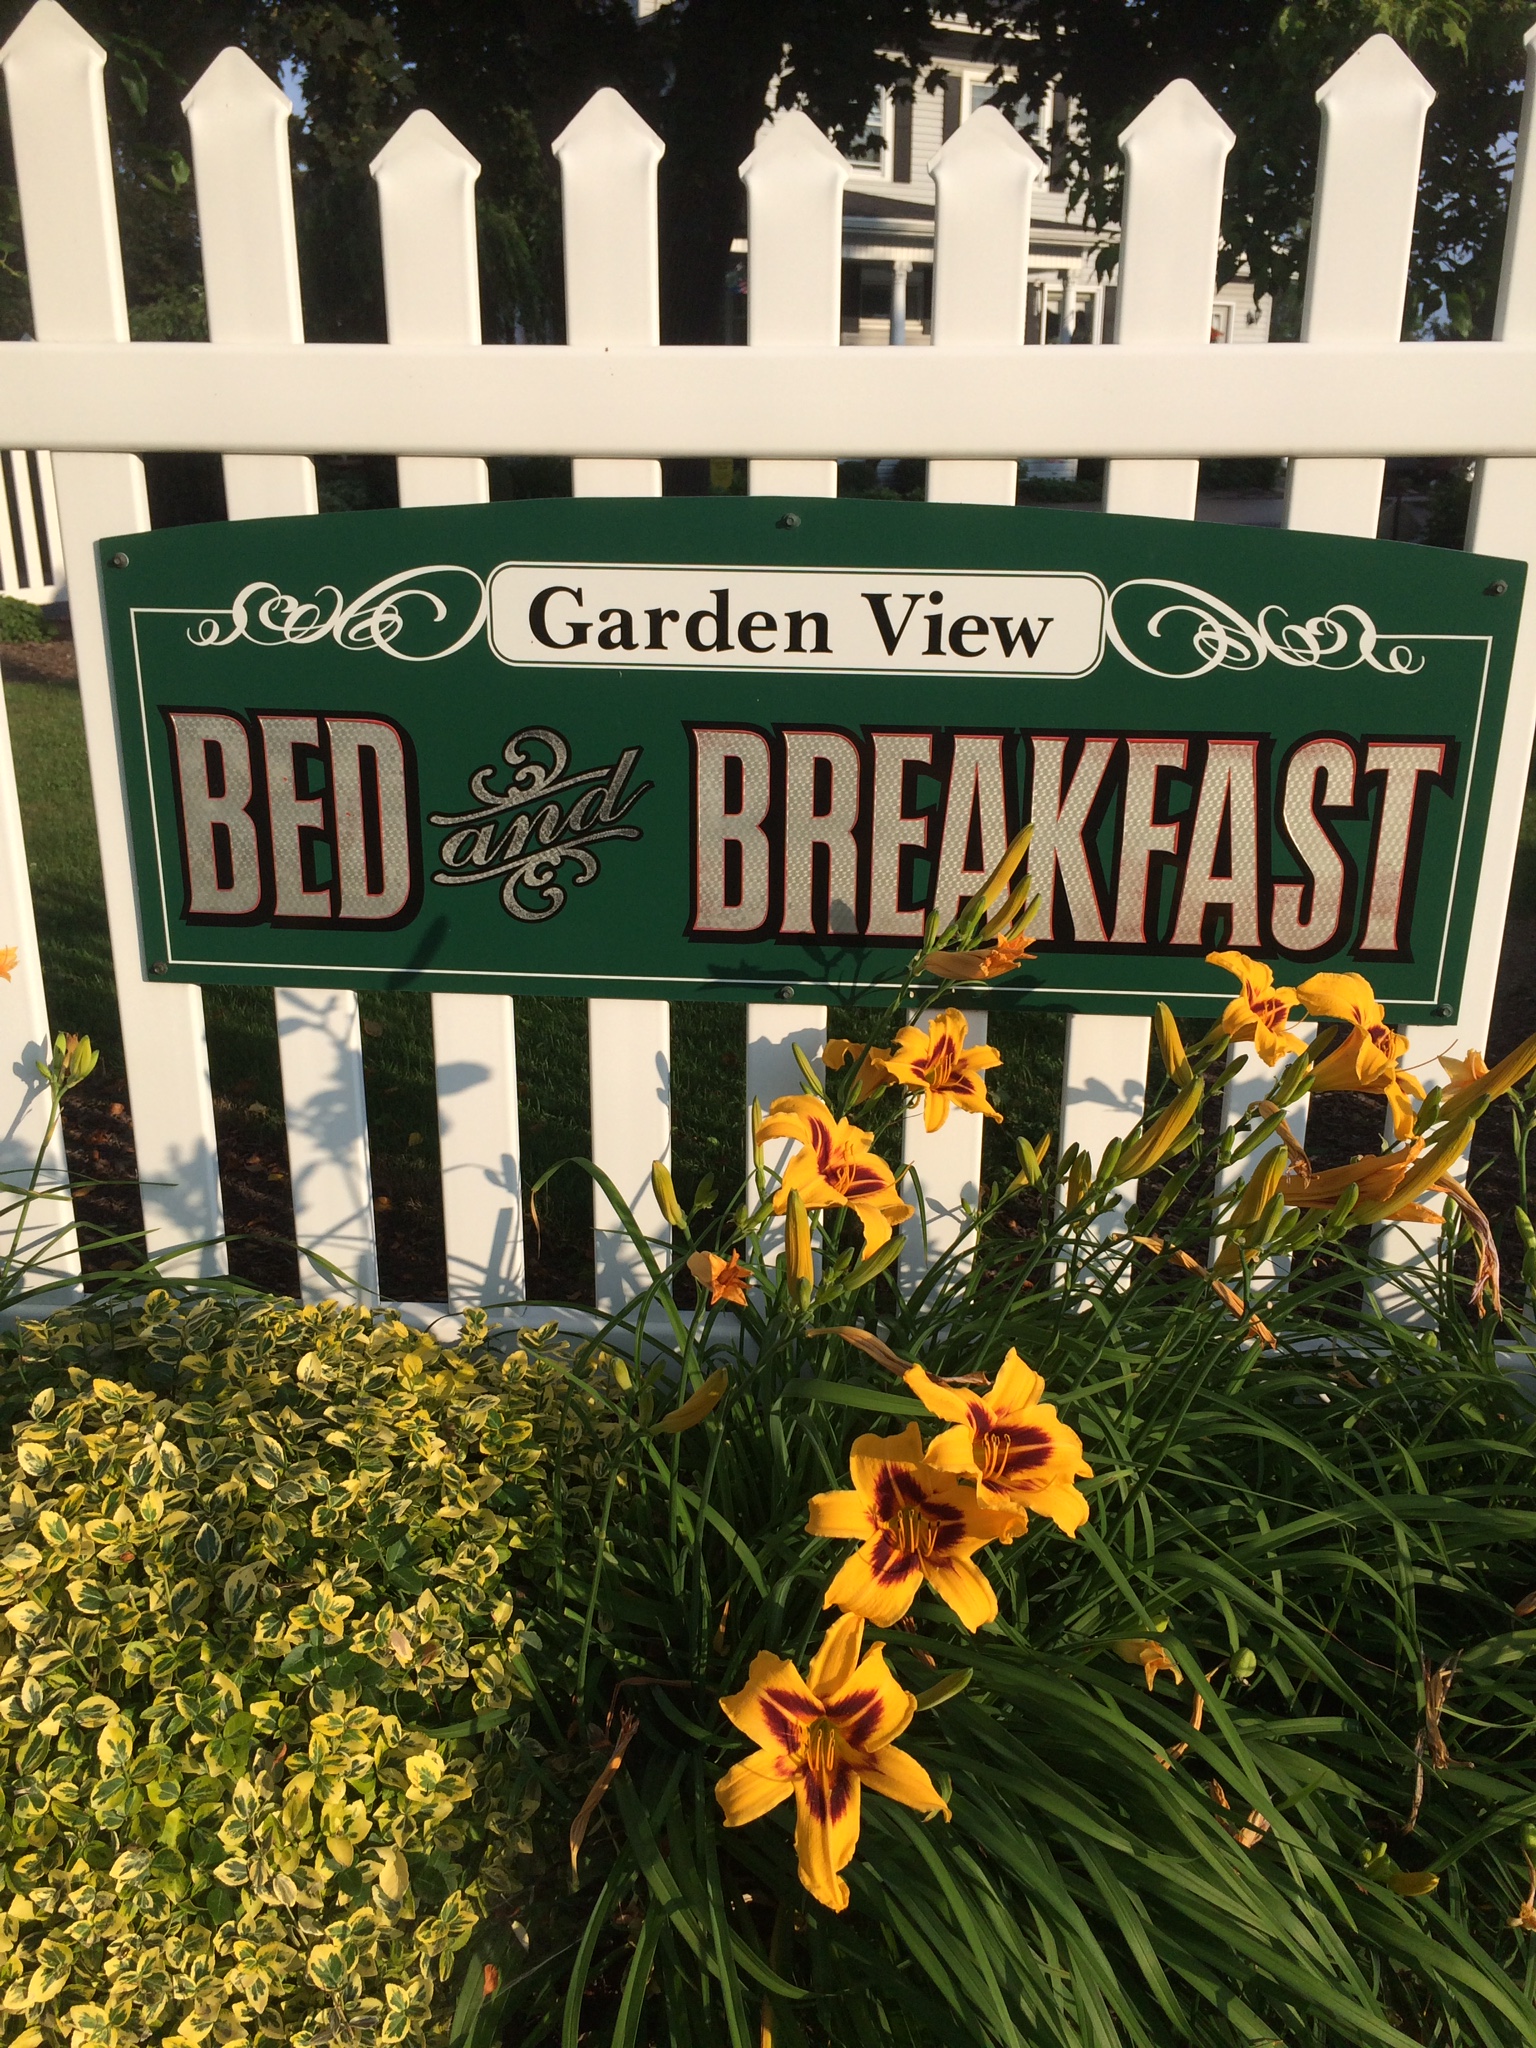 Gardenview Bed and Breakfast signs